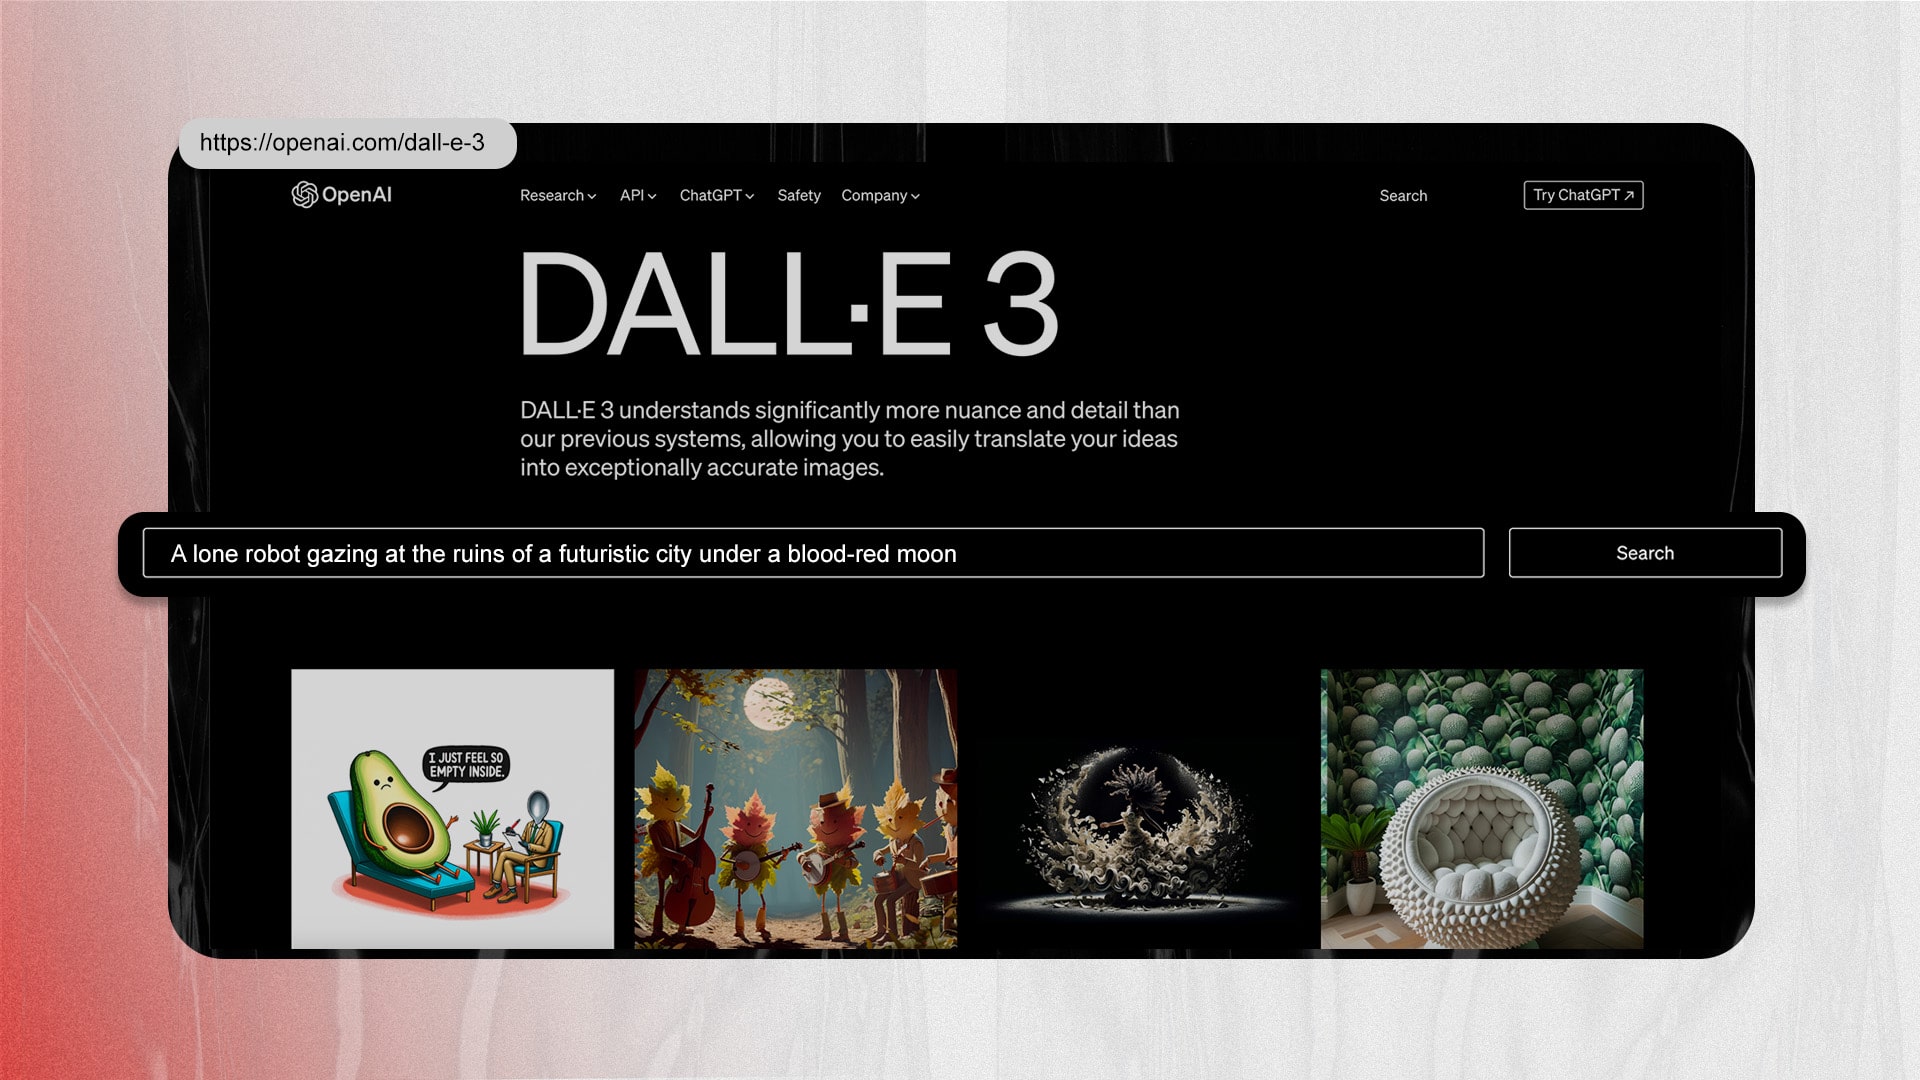 Interface of Dalle-3